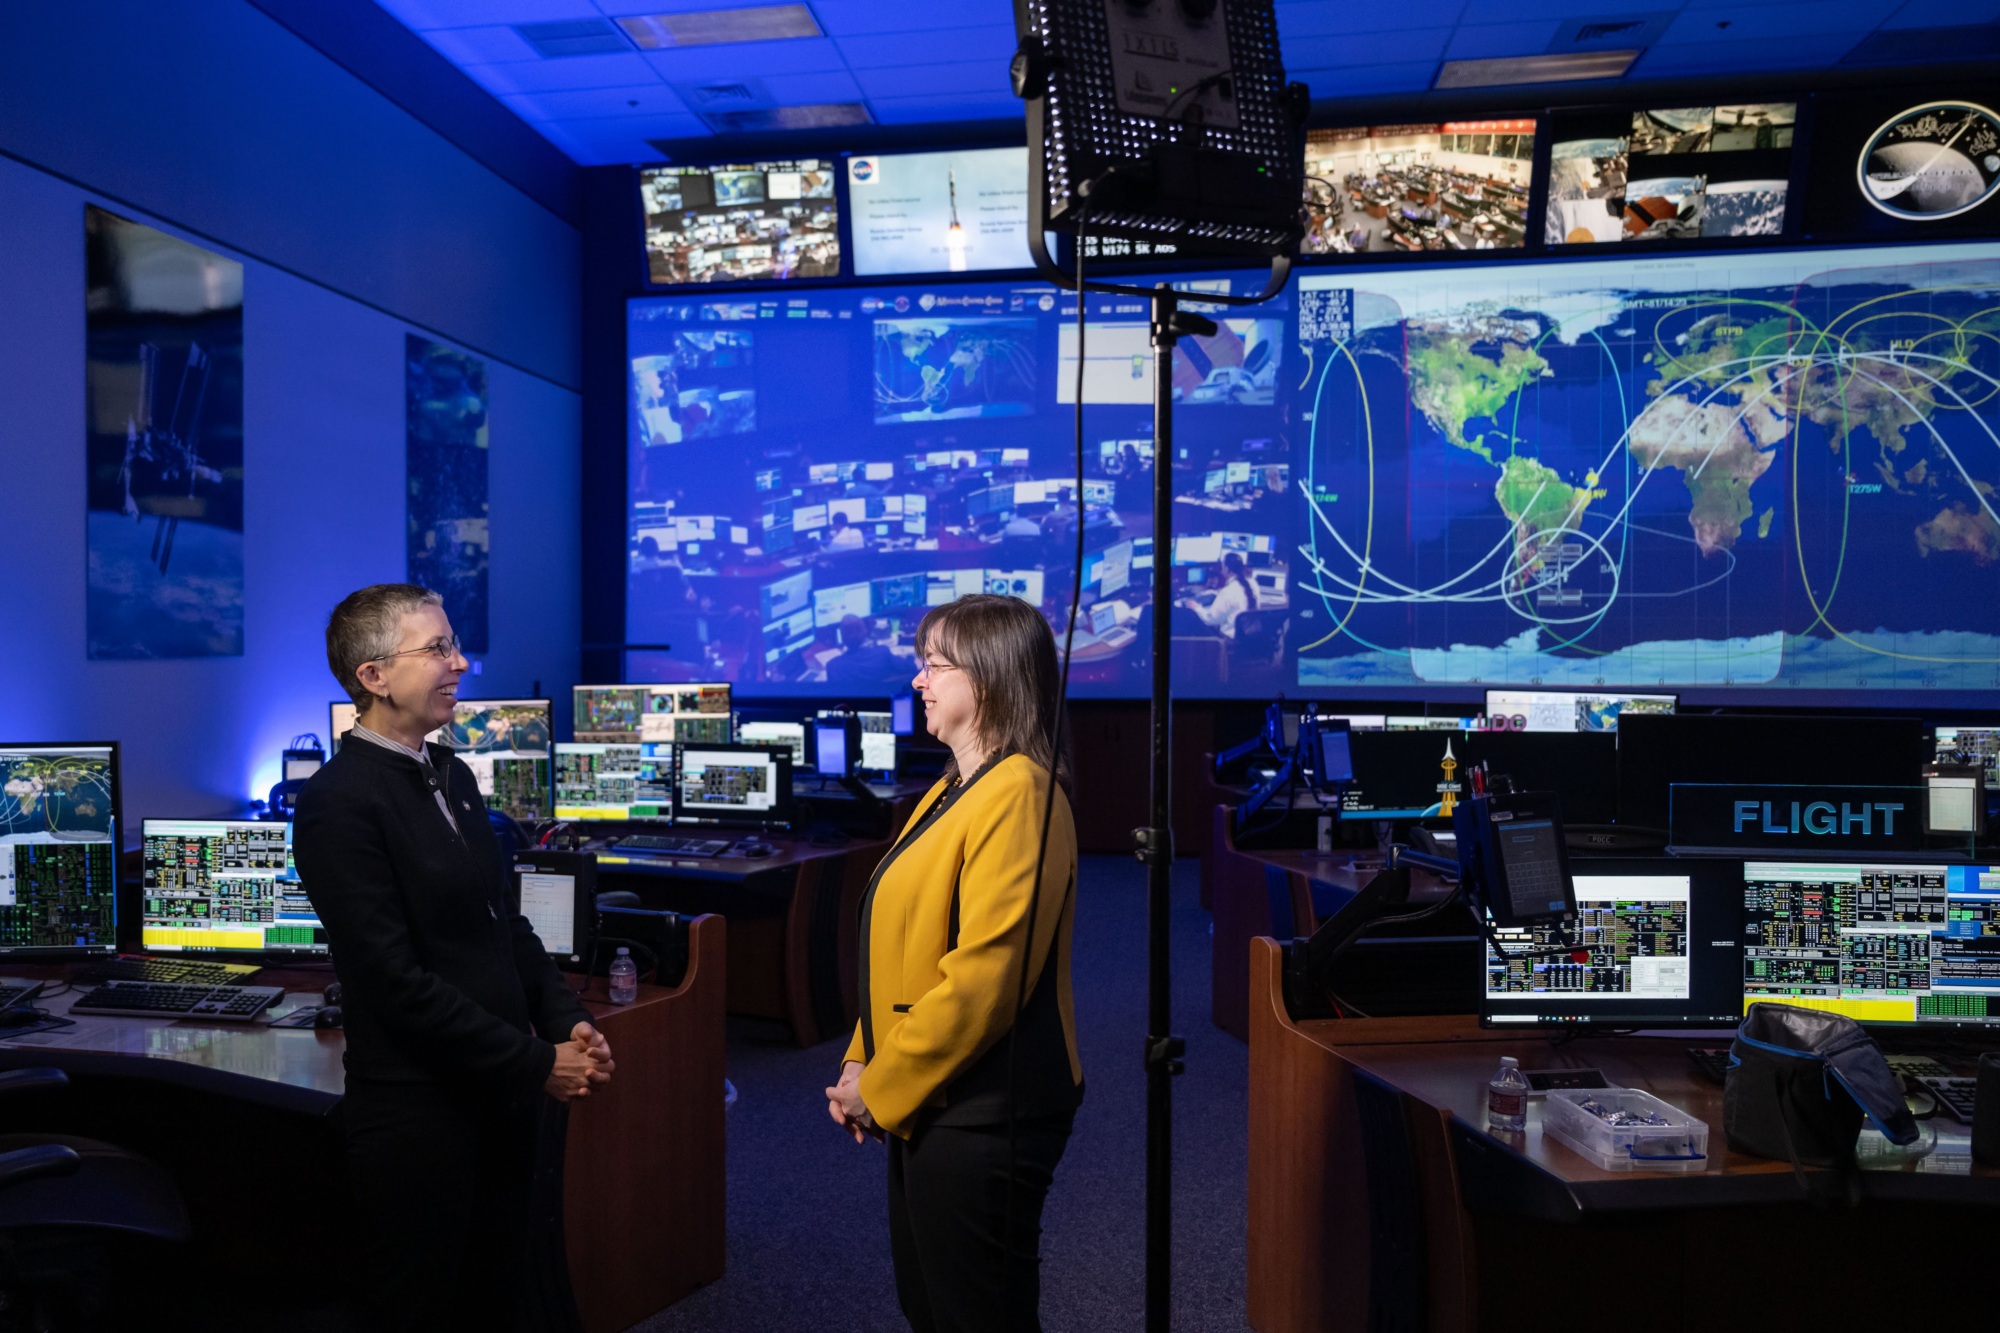 two people talking in front of a control screen